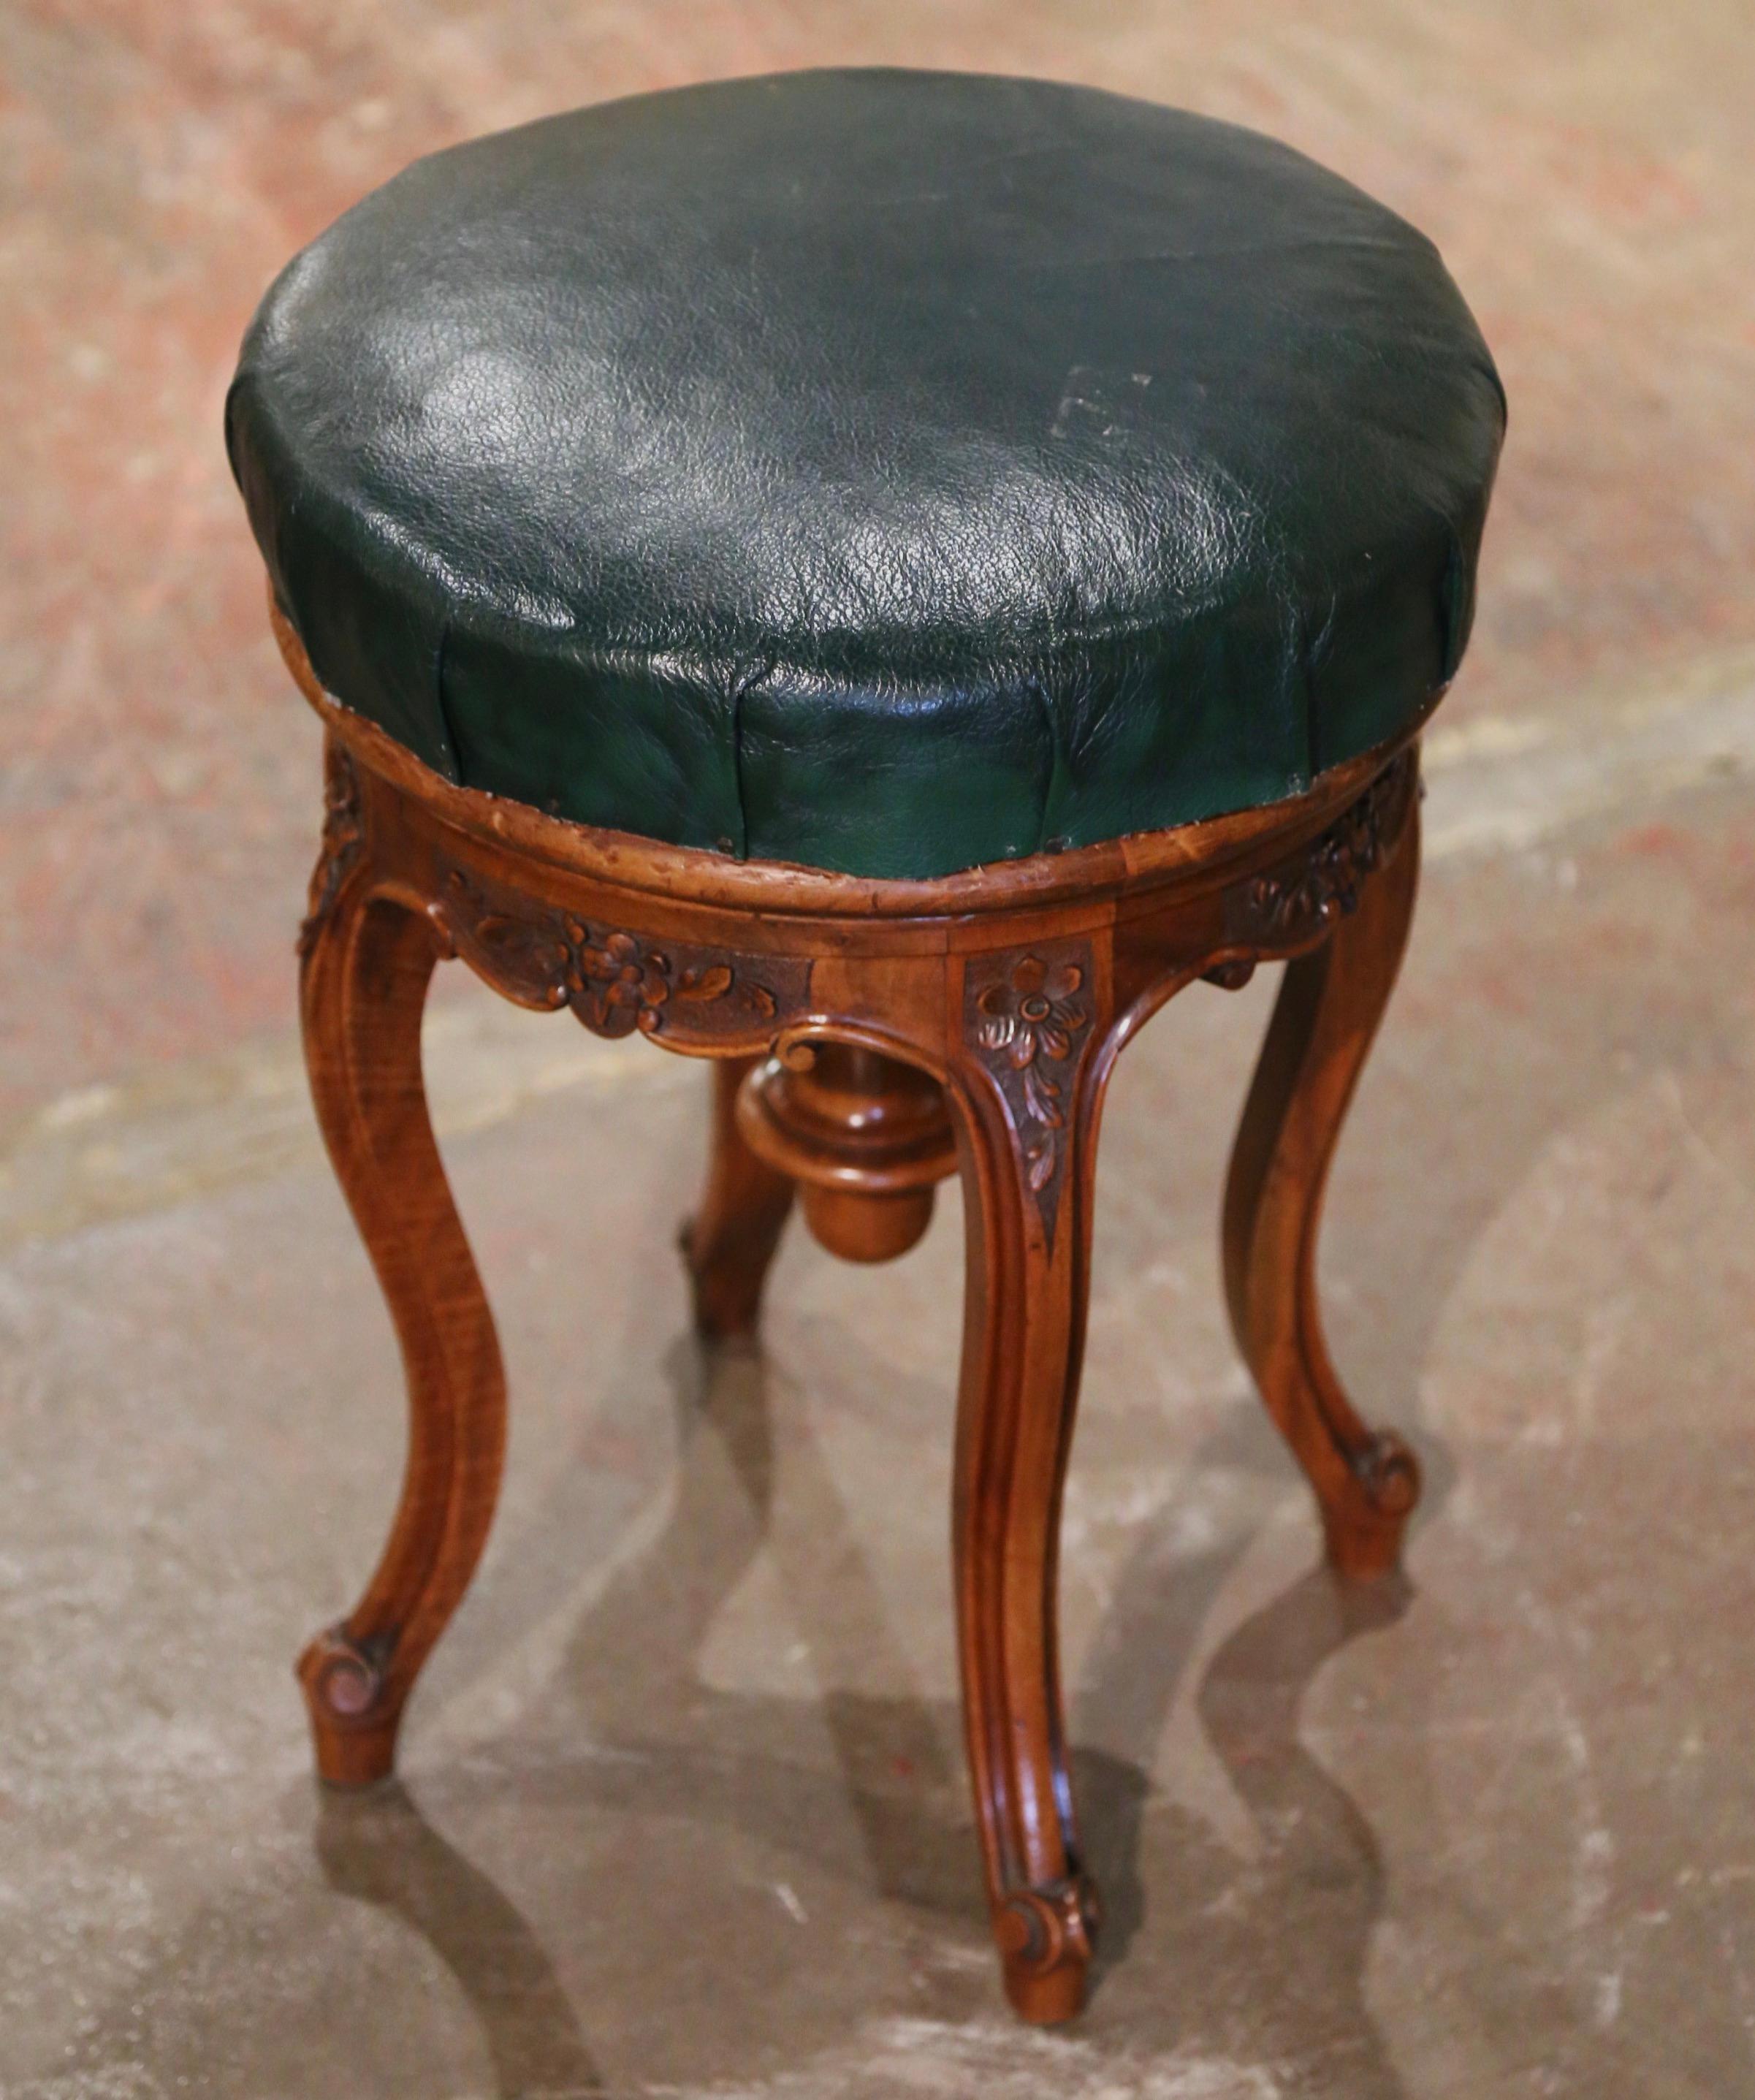 This carved antique fruitwood stool was created in Provence, France circa 1880. Standing on cabriole legs ending with escargot feet, the piano seating is decorated with floral motifs at the shoulders. The round seating is upholstered with a green